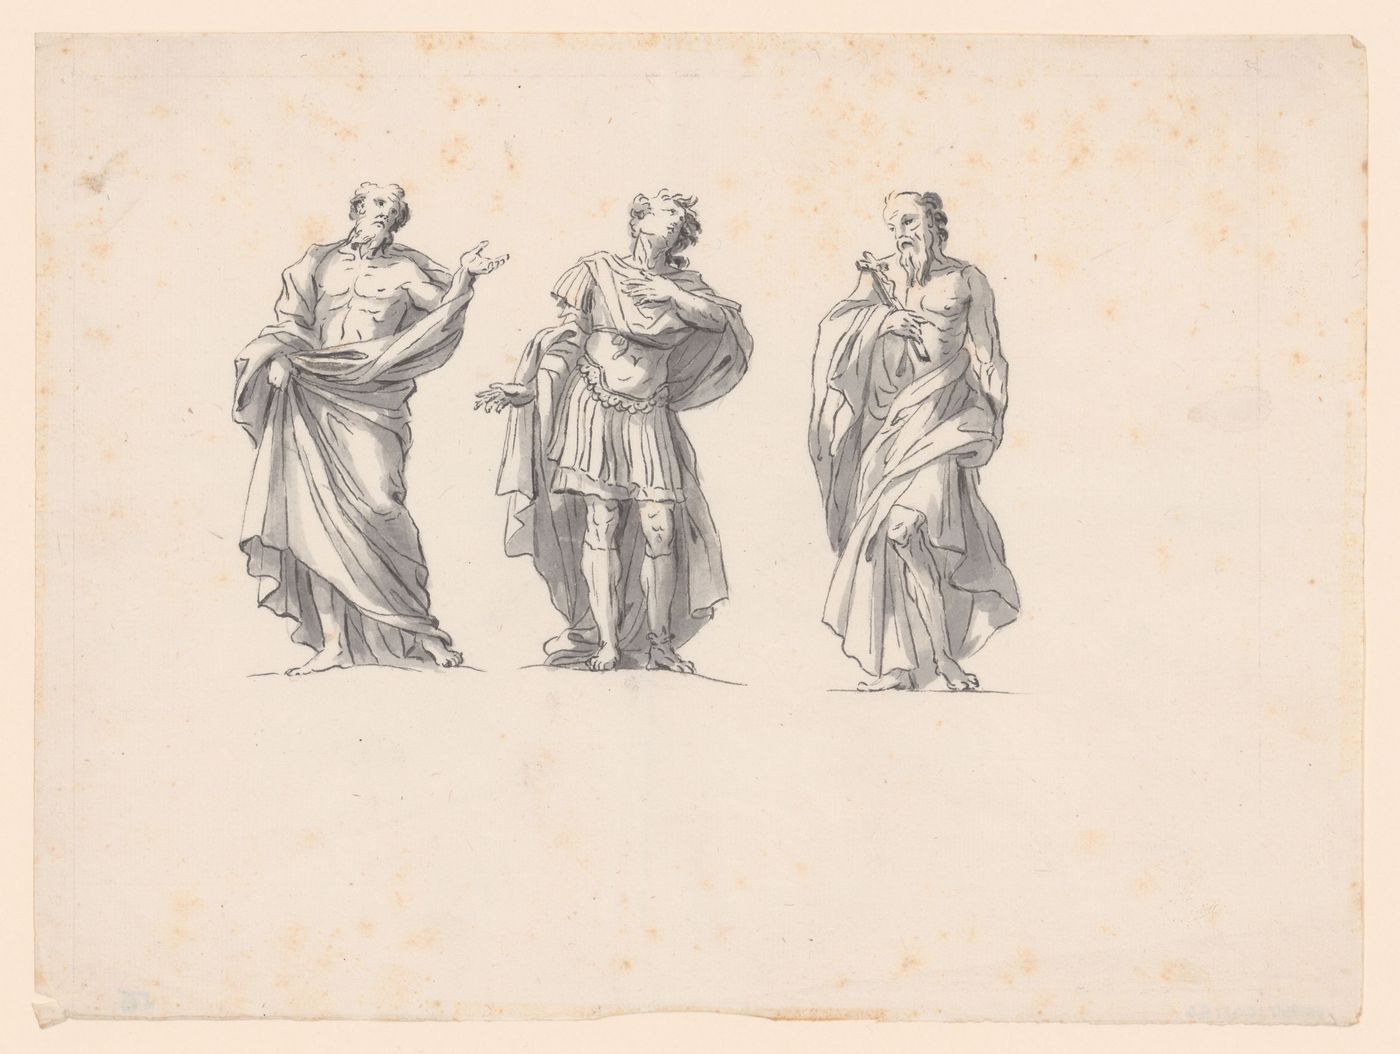 Drawings of three statues on the colonnade of St. Peter's, Rome